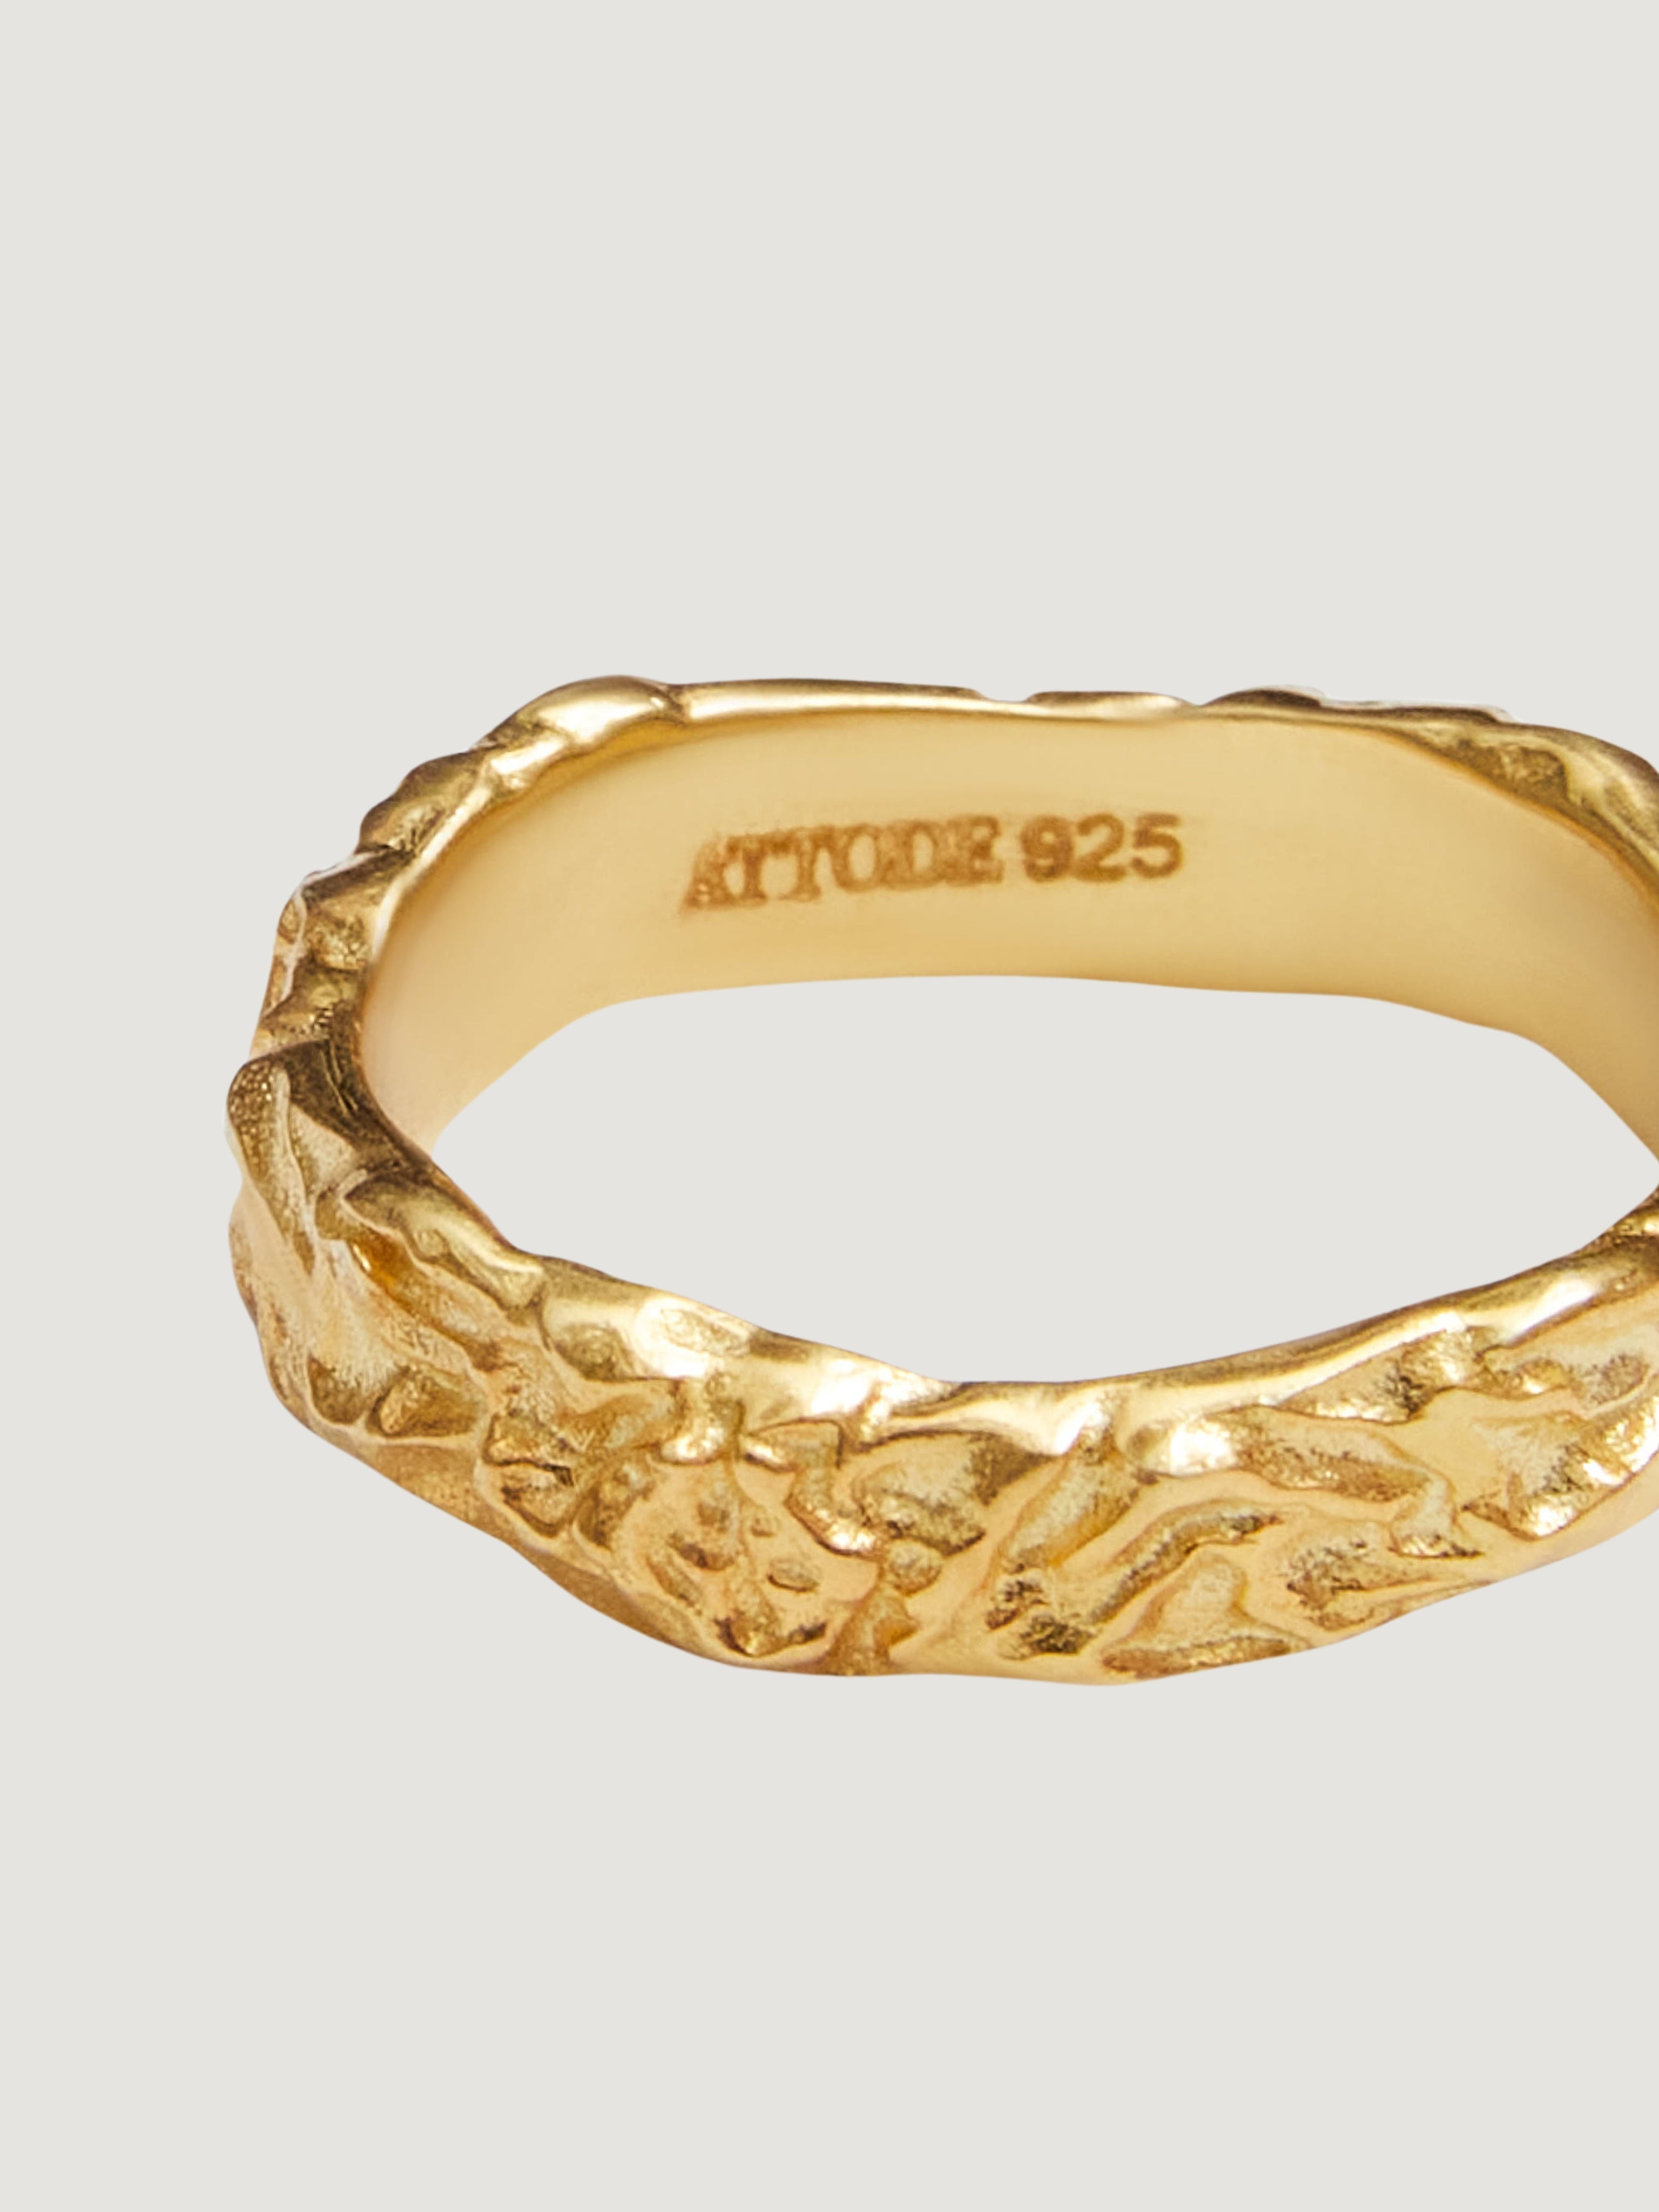 SMALL EVERYDAY RING GOLD - ATTODE